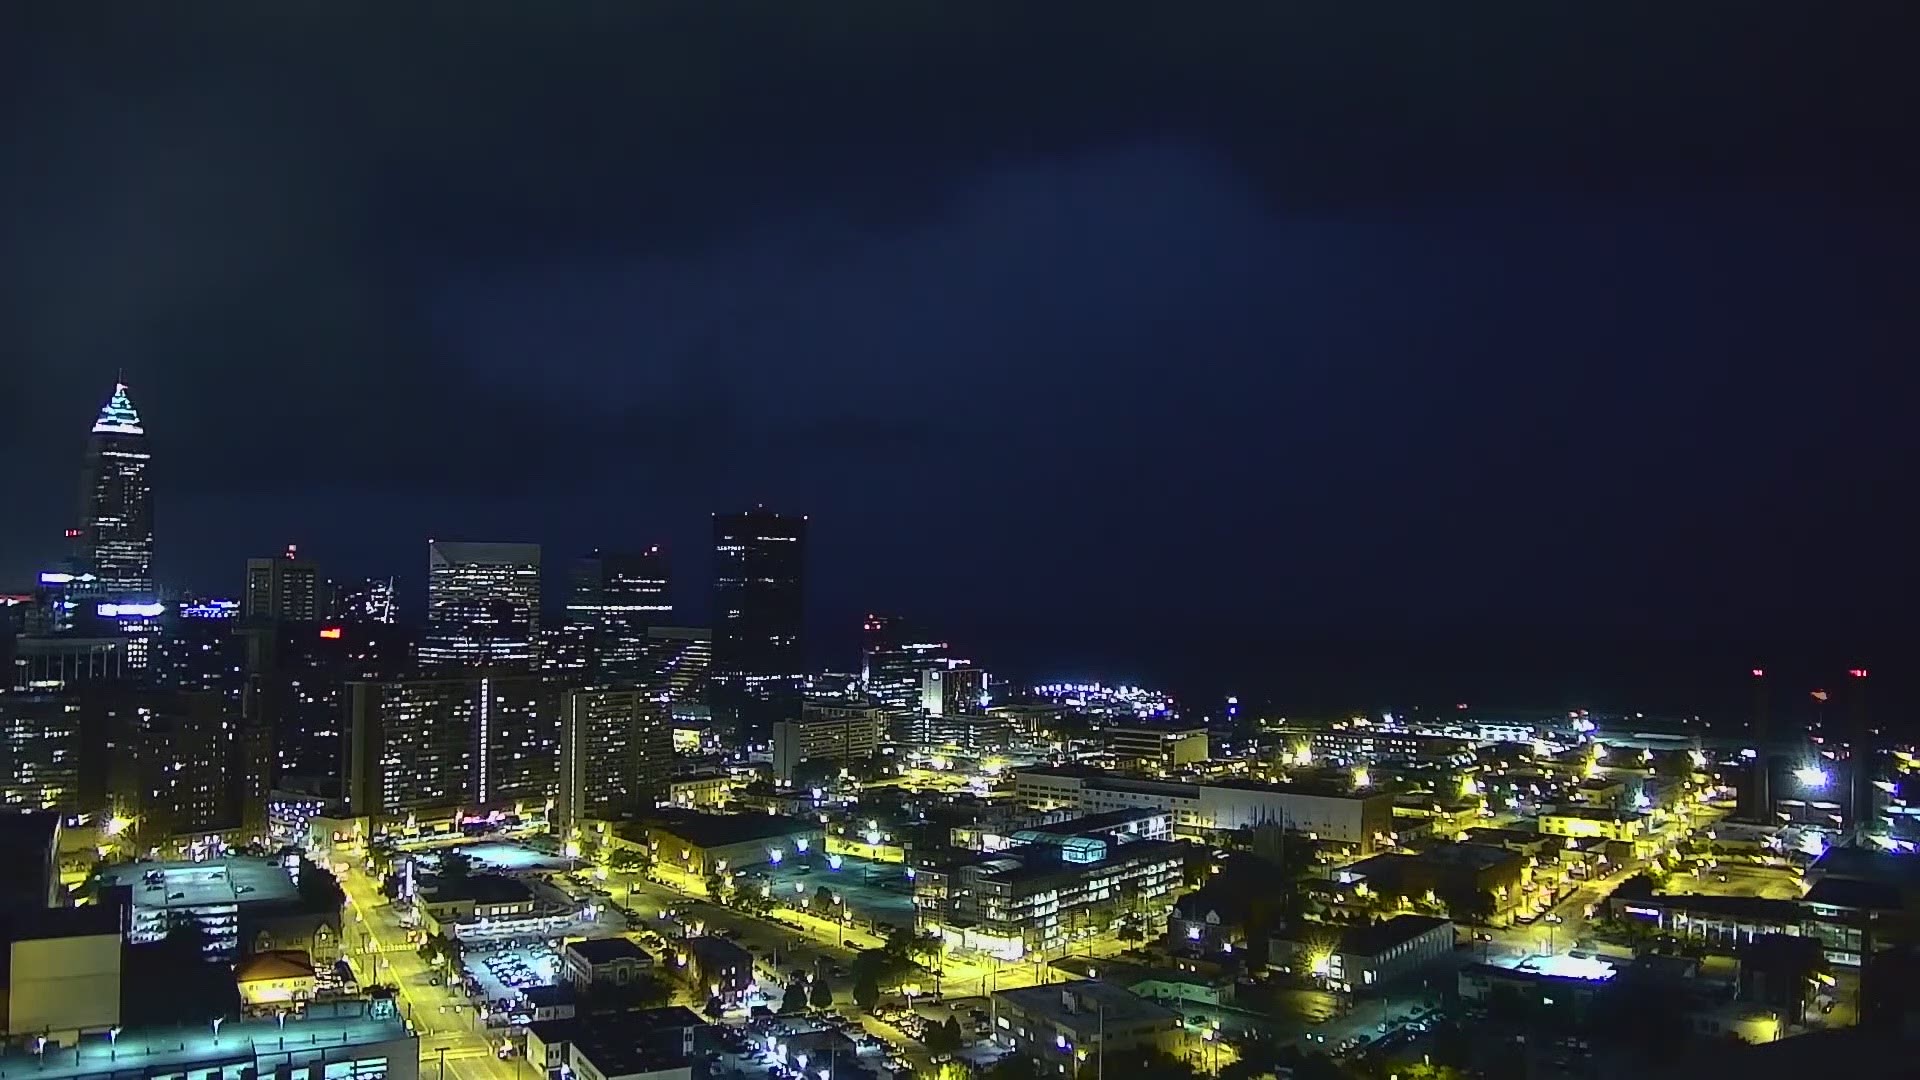 Check out our time lapse of the storms moving through downtown Cleveland a little while ago from the Channel 3 CSU Cam. #3weather